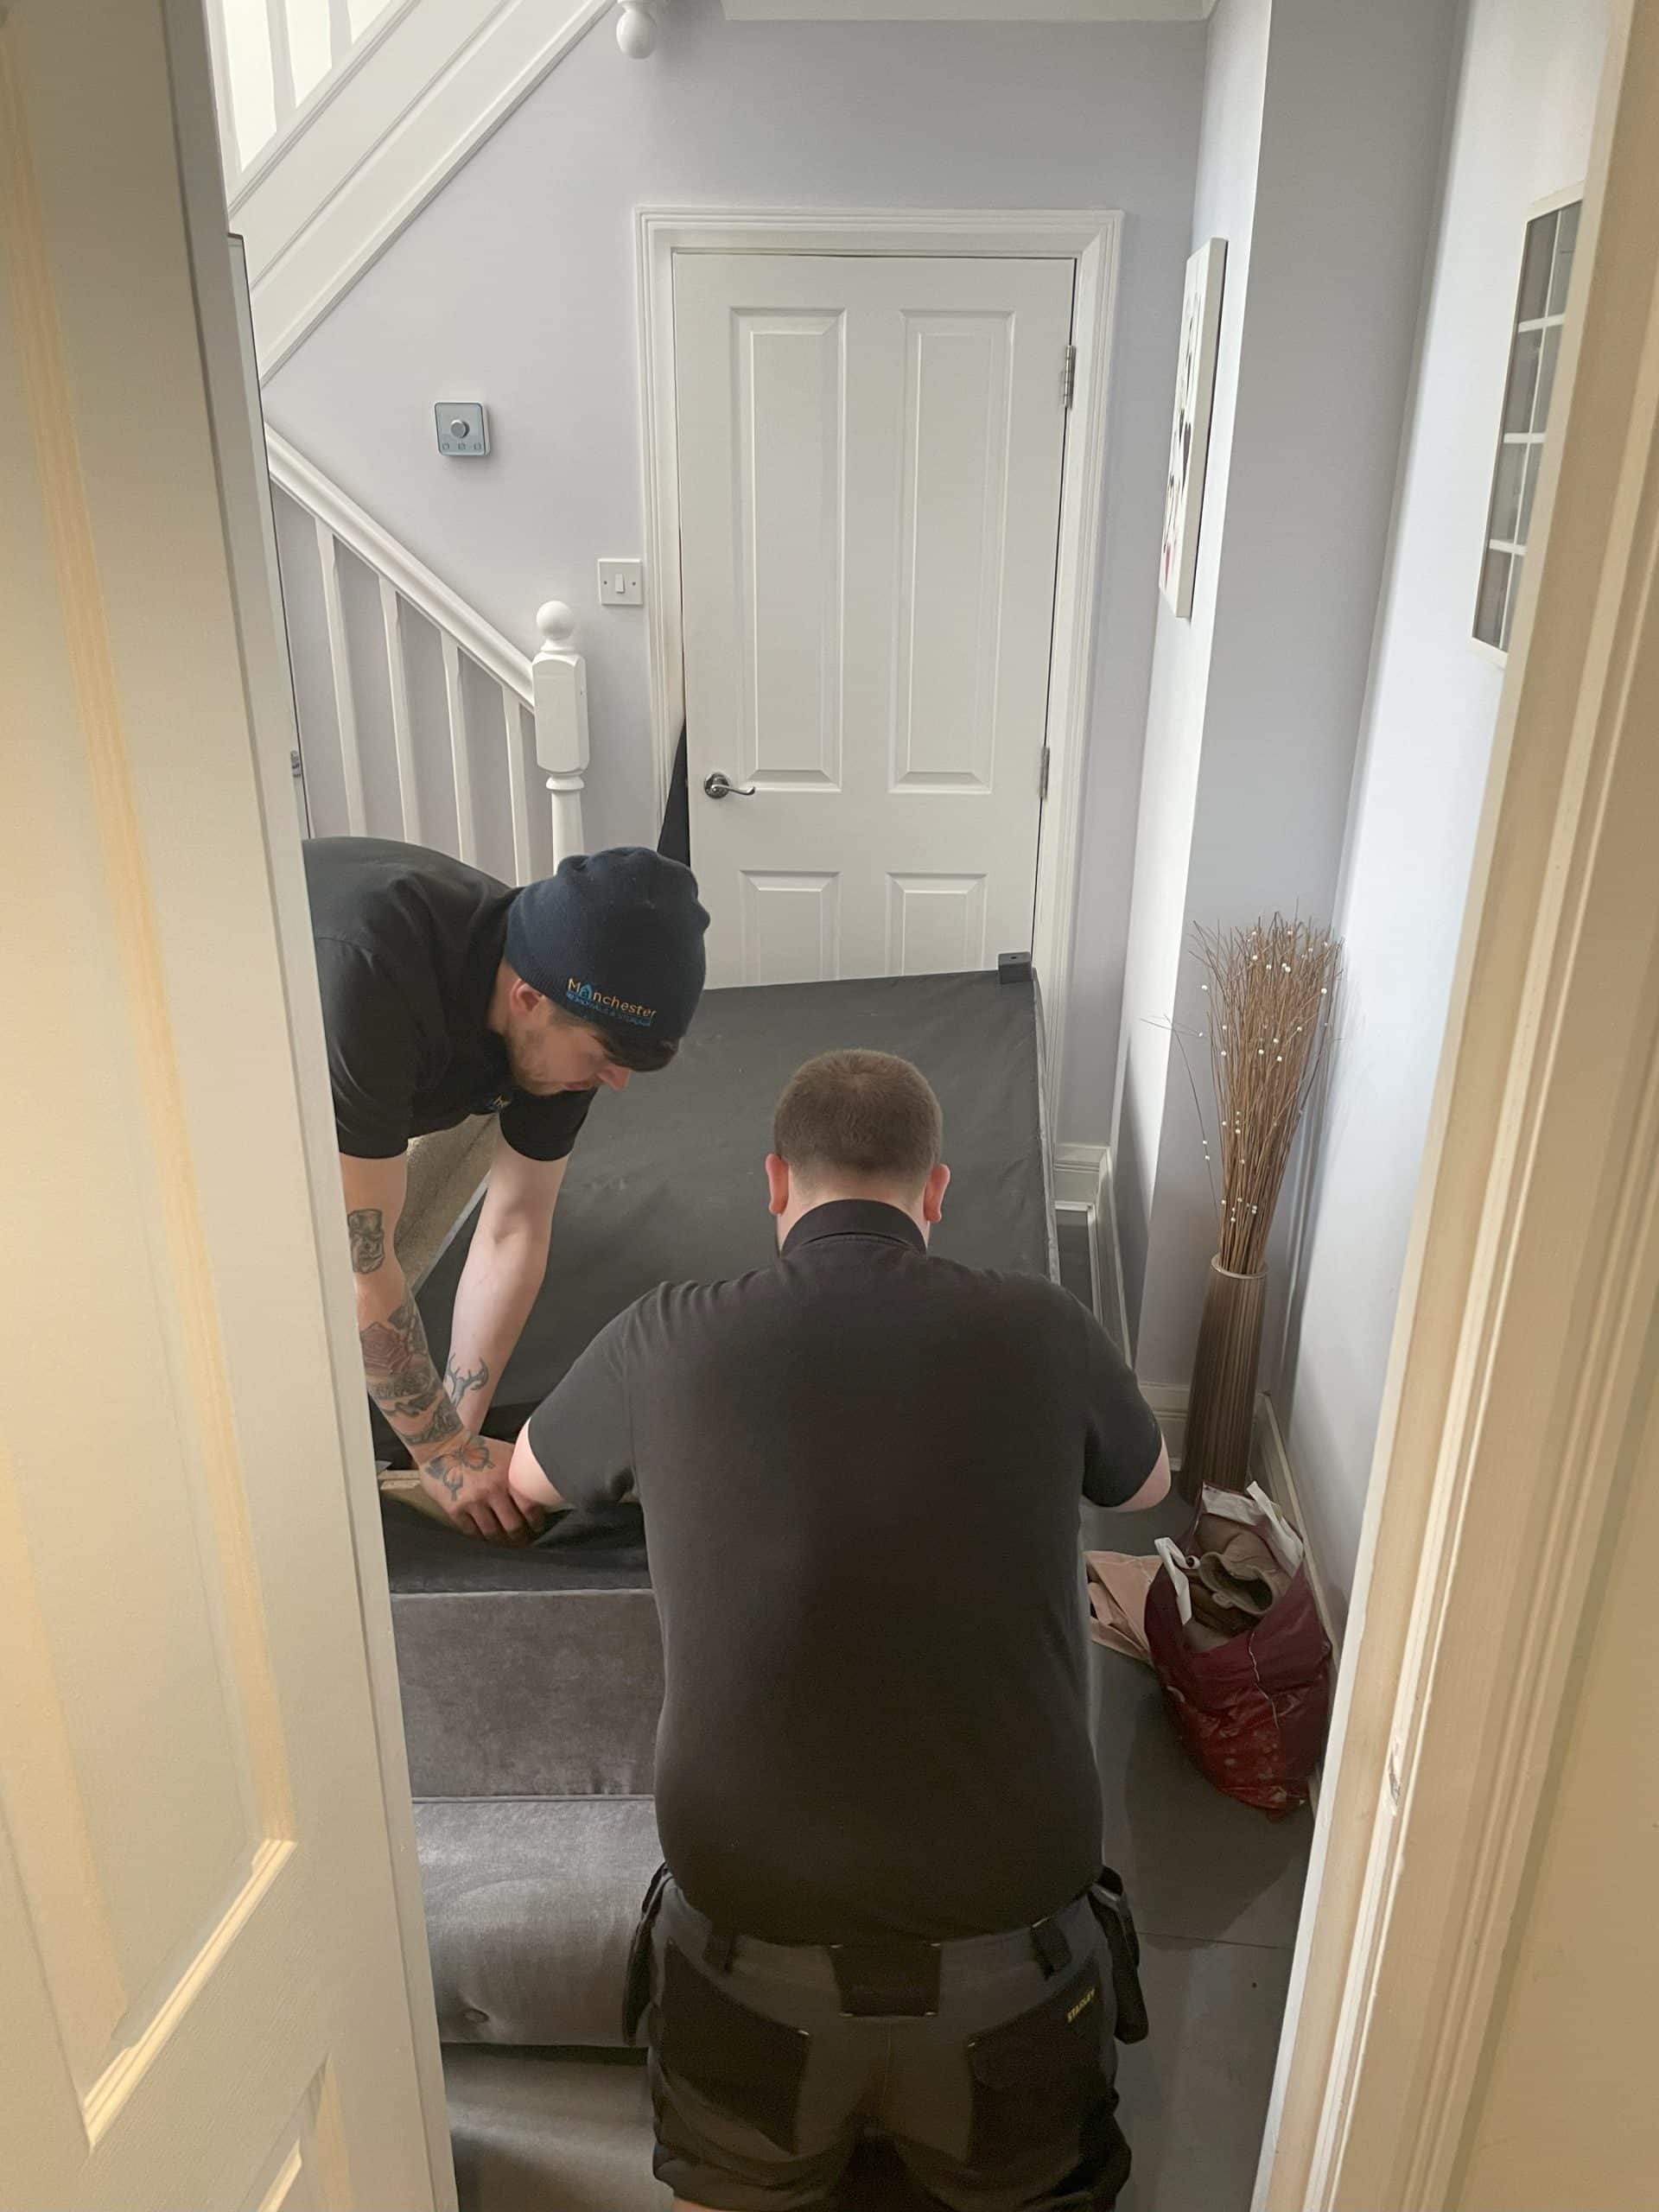 Removals Crew Dismantling a Sofa - Manchester Removals & Storage - Manchester Removals & Storage